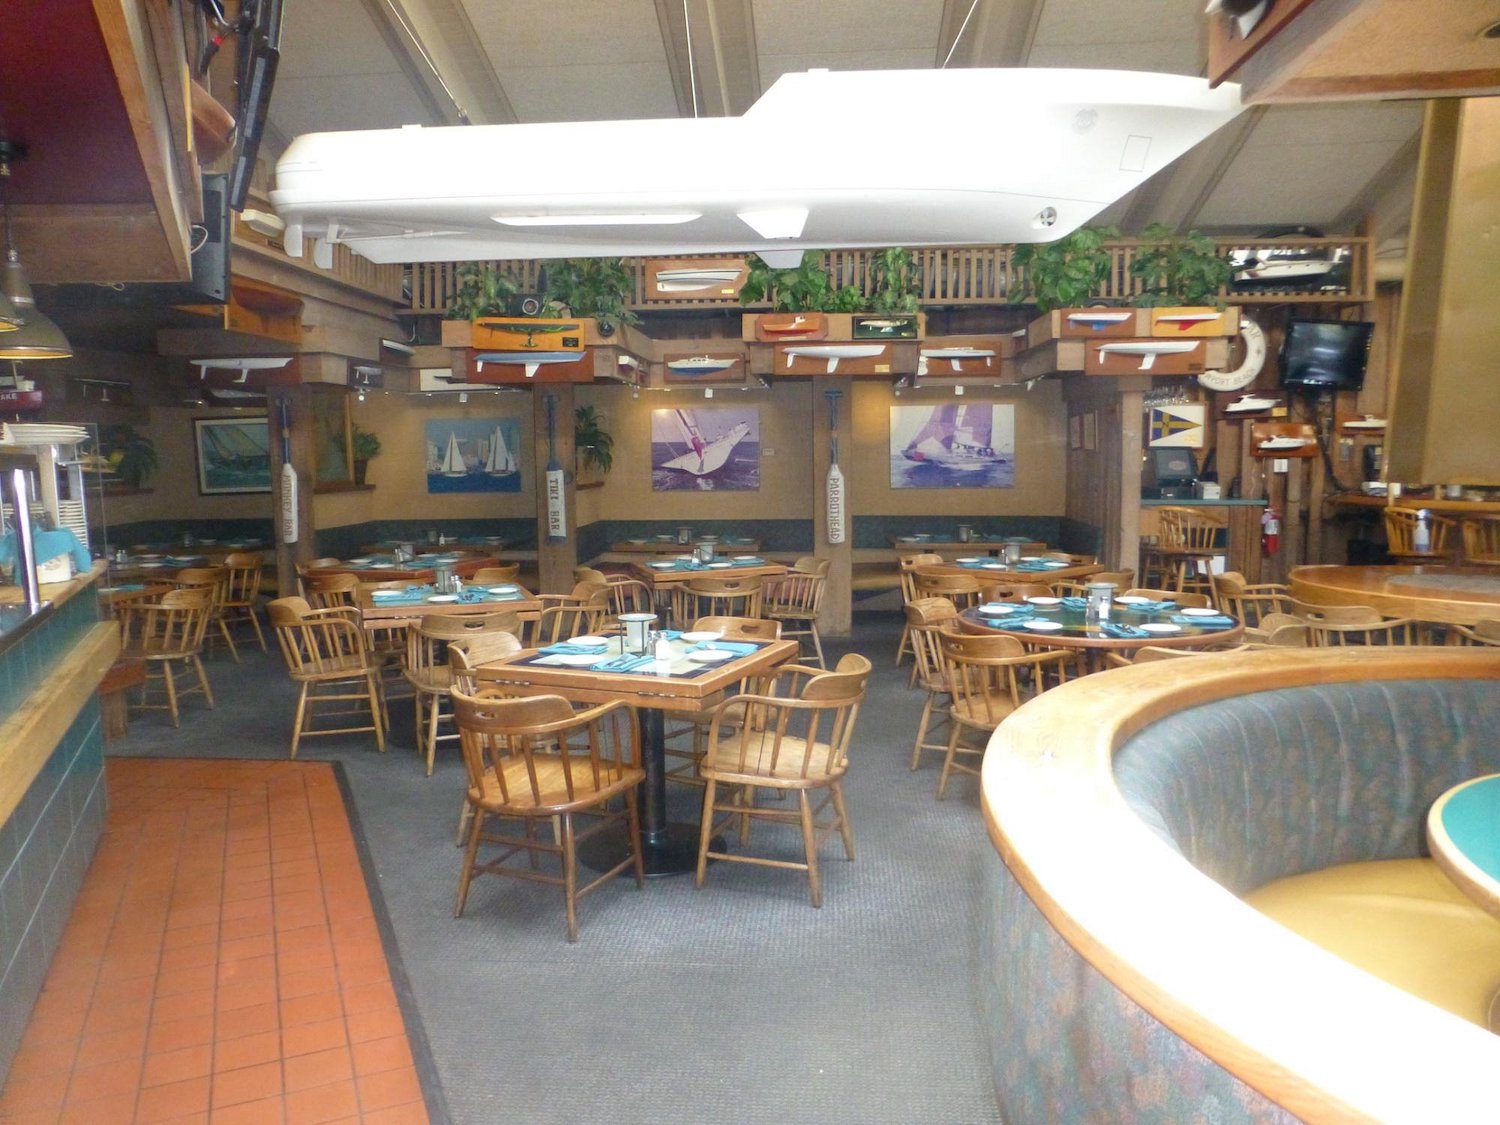 Interior of Fiddler's Green restaurant in Point Loma, San Diego being replaced by steakhouse and speakeasy The Boatyard by Paul Basile